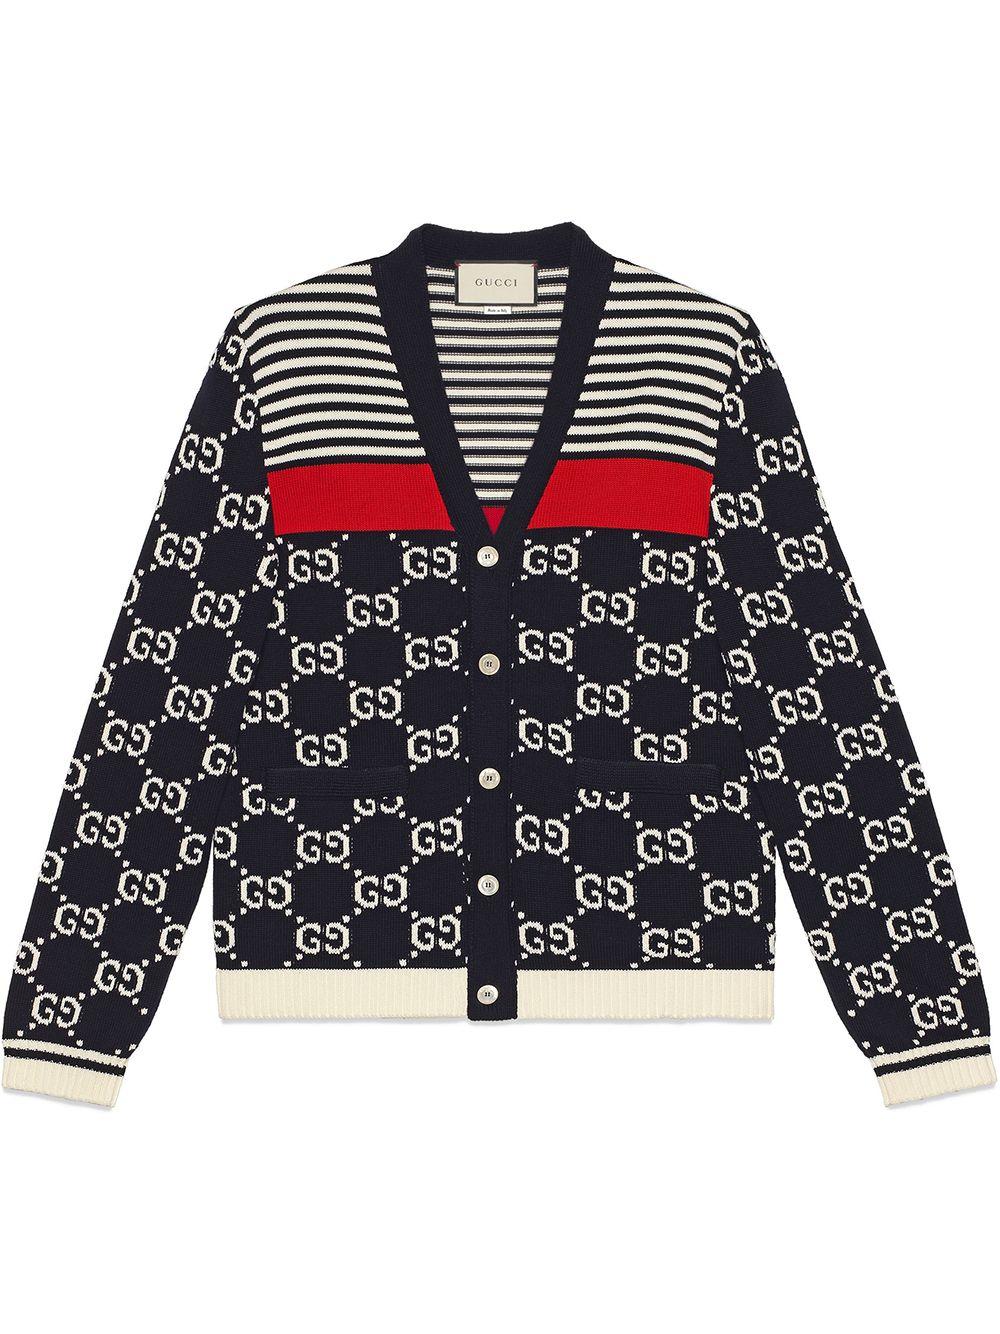 GG And Stripes Knit Cardigan Blue for Men Lyst